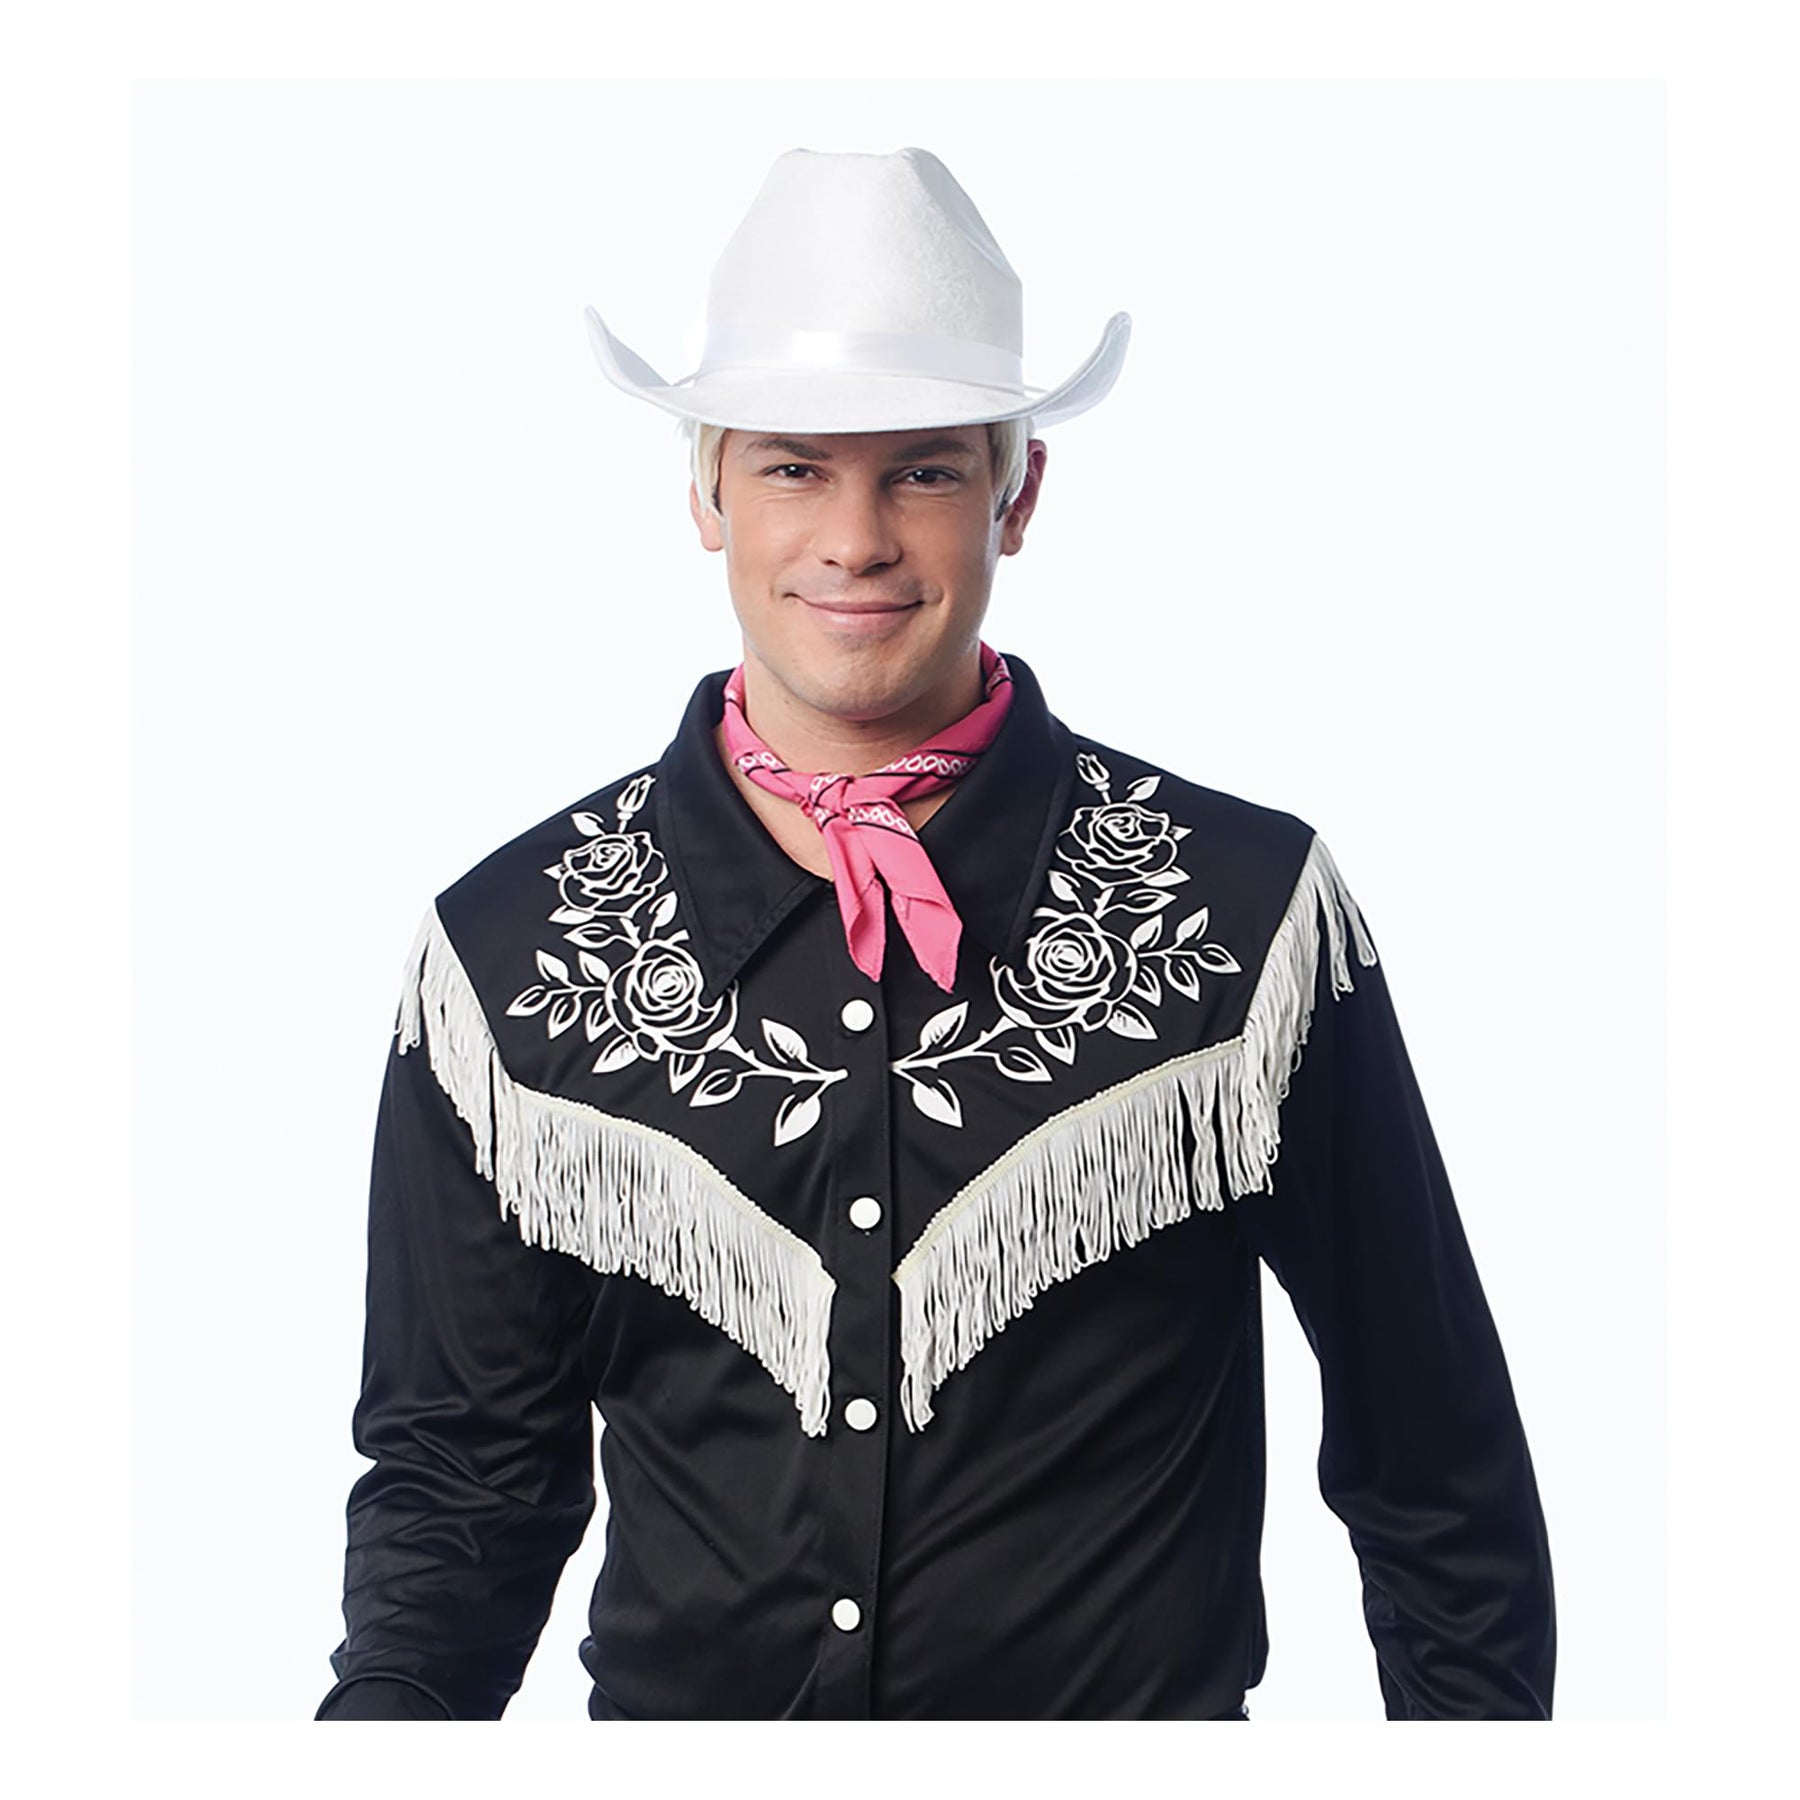 Rancher White Cowboy Hat Adult Costume Accessory